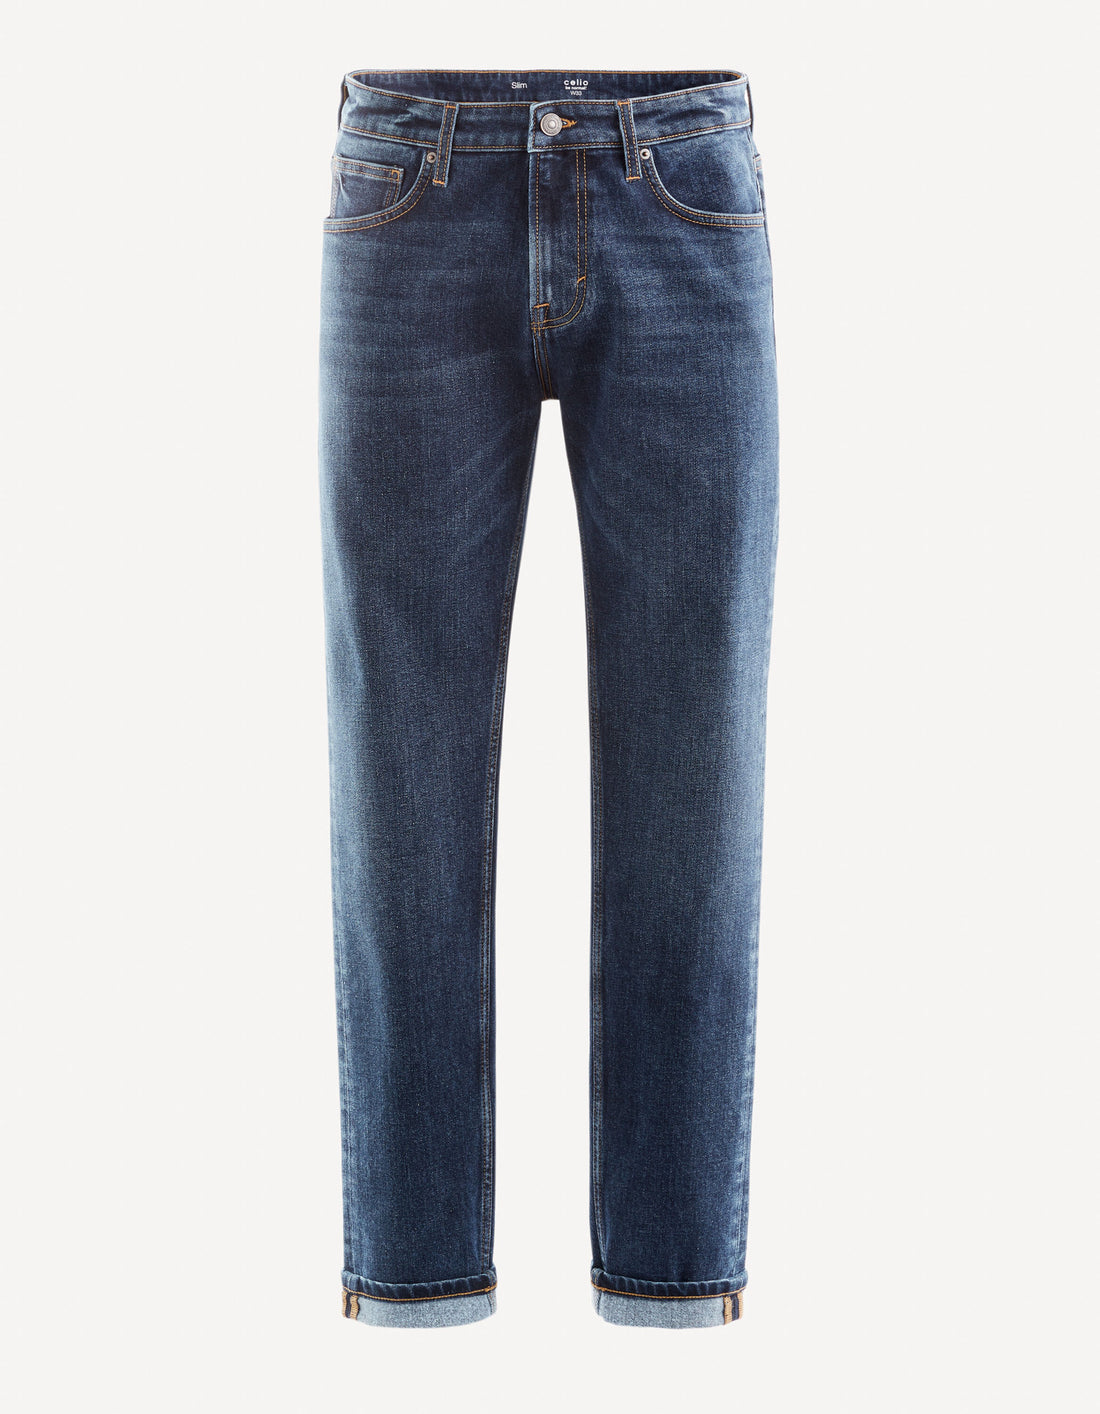 Thermolite® Slim C25 Stretch Jeans_FOTHERM_DOUBLE STONE_01